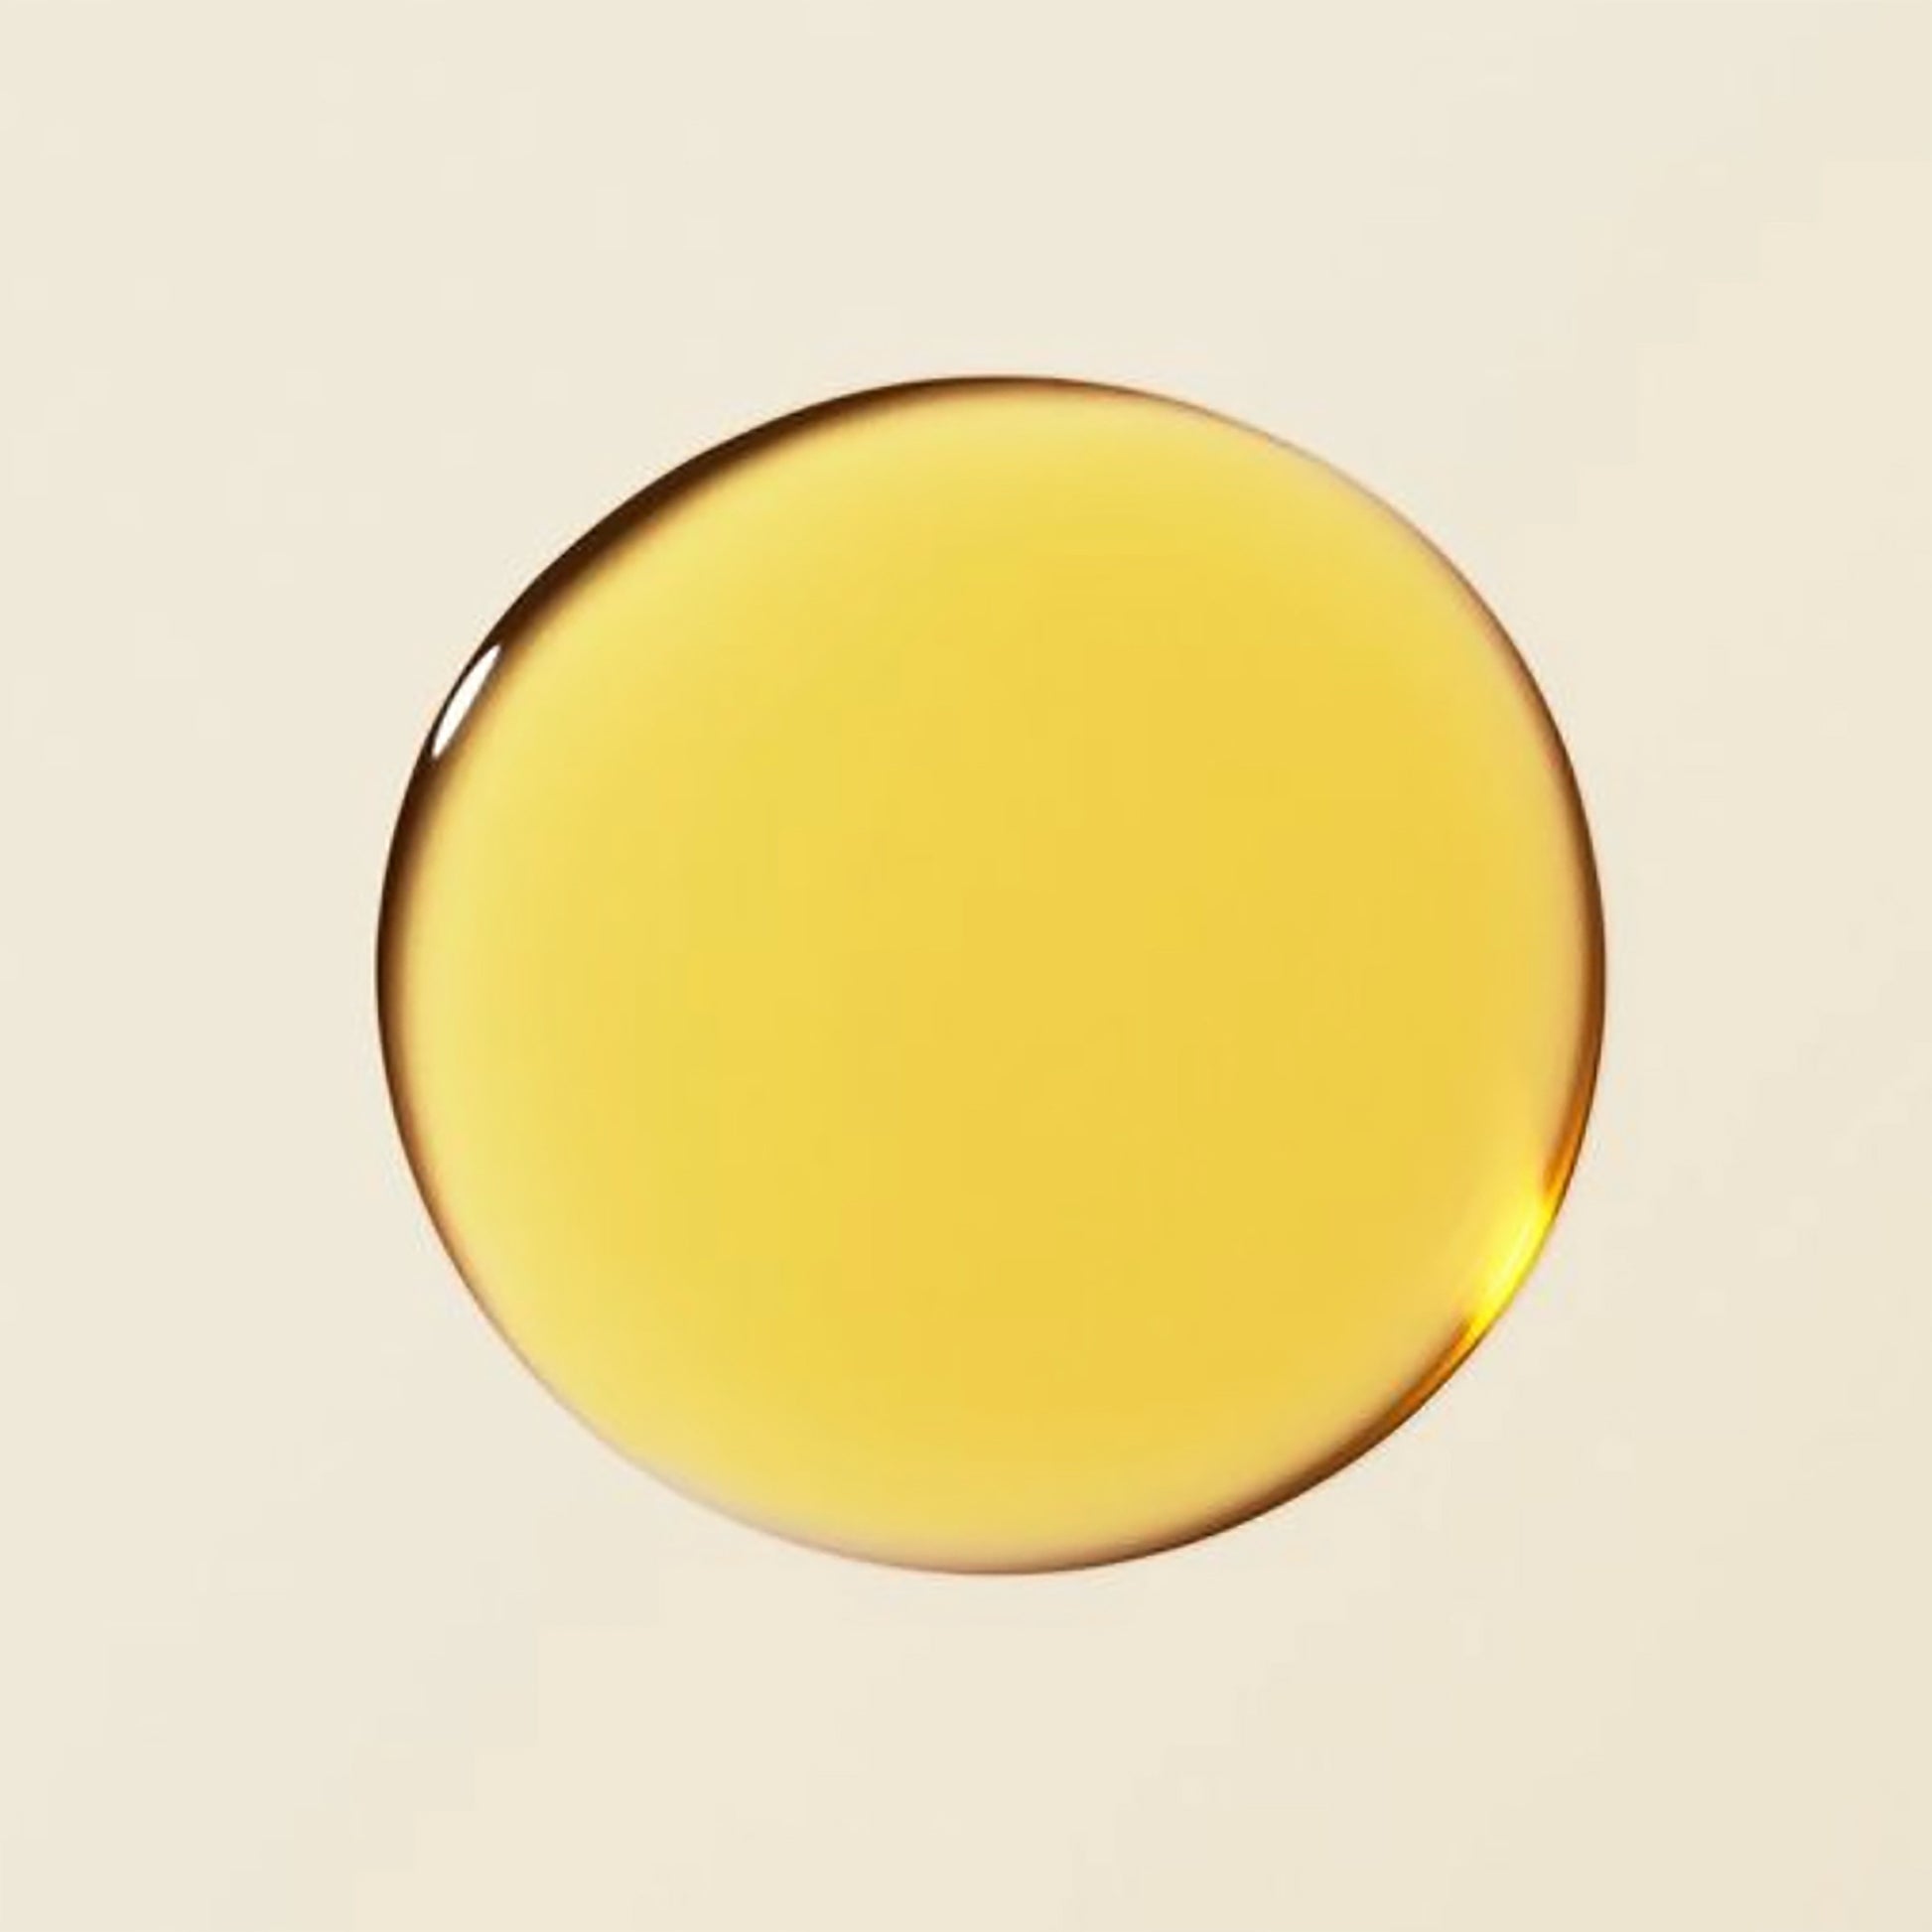 a drop of the leila lou everyday body oil.